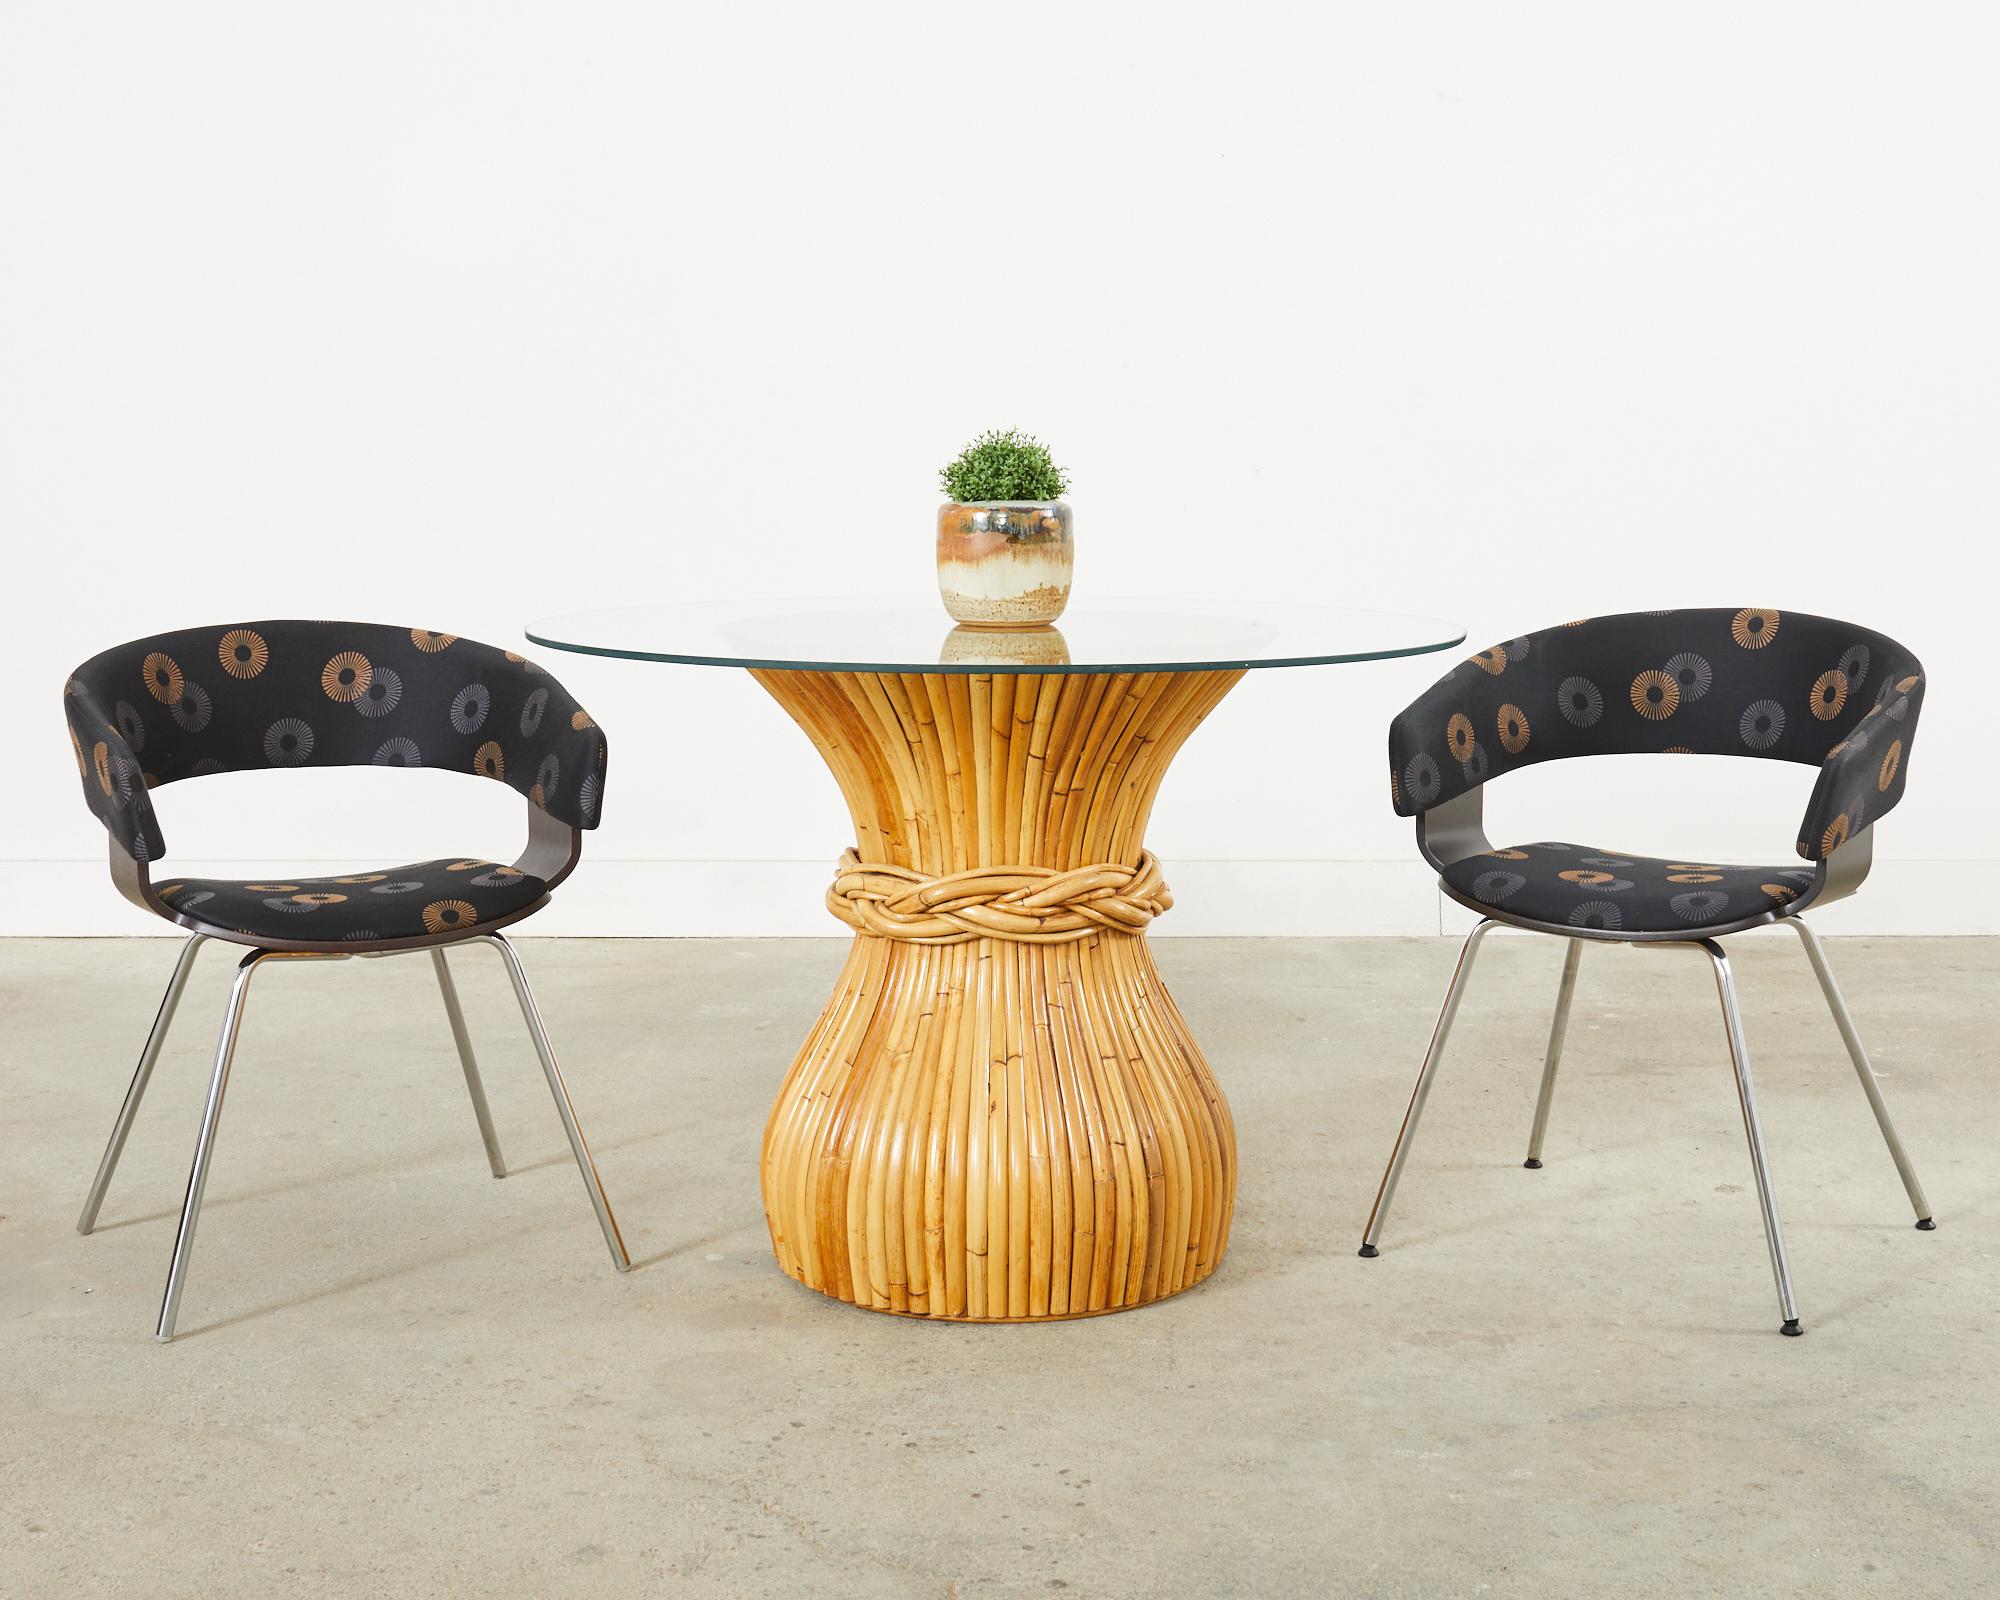 Stylish set of four post modern dining armchairs designed by John Coleman for Allermuir in the late 20th century. Known as the Mollie chair with a gracefully curved wood shell in an ebonized finish. The shell seat is supported by chromed steel legs.